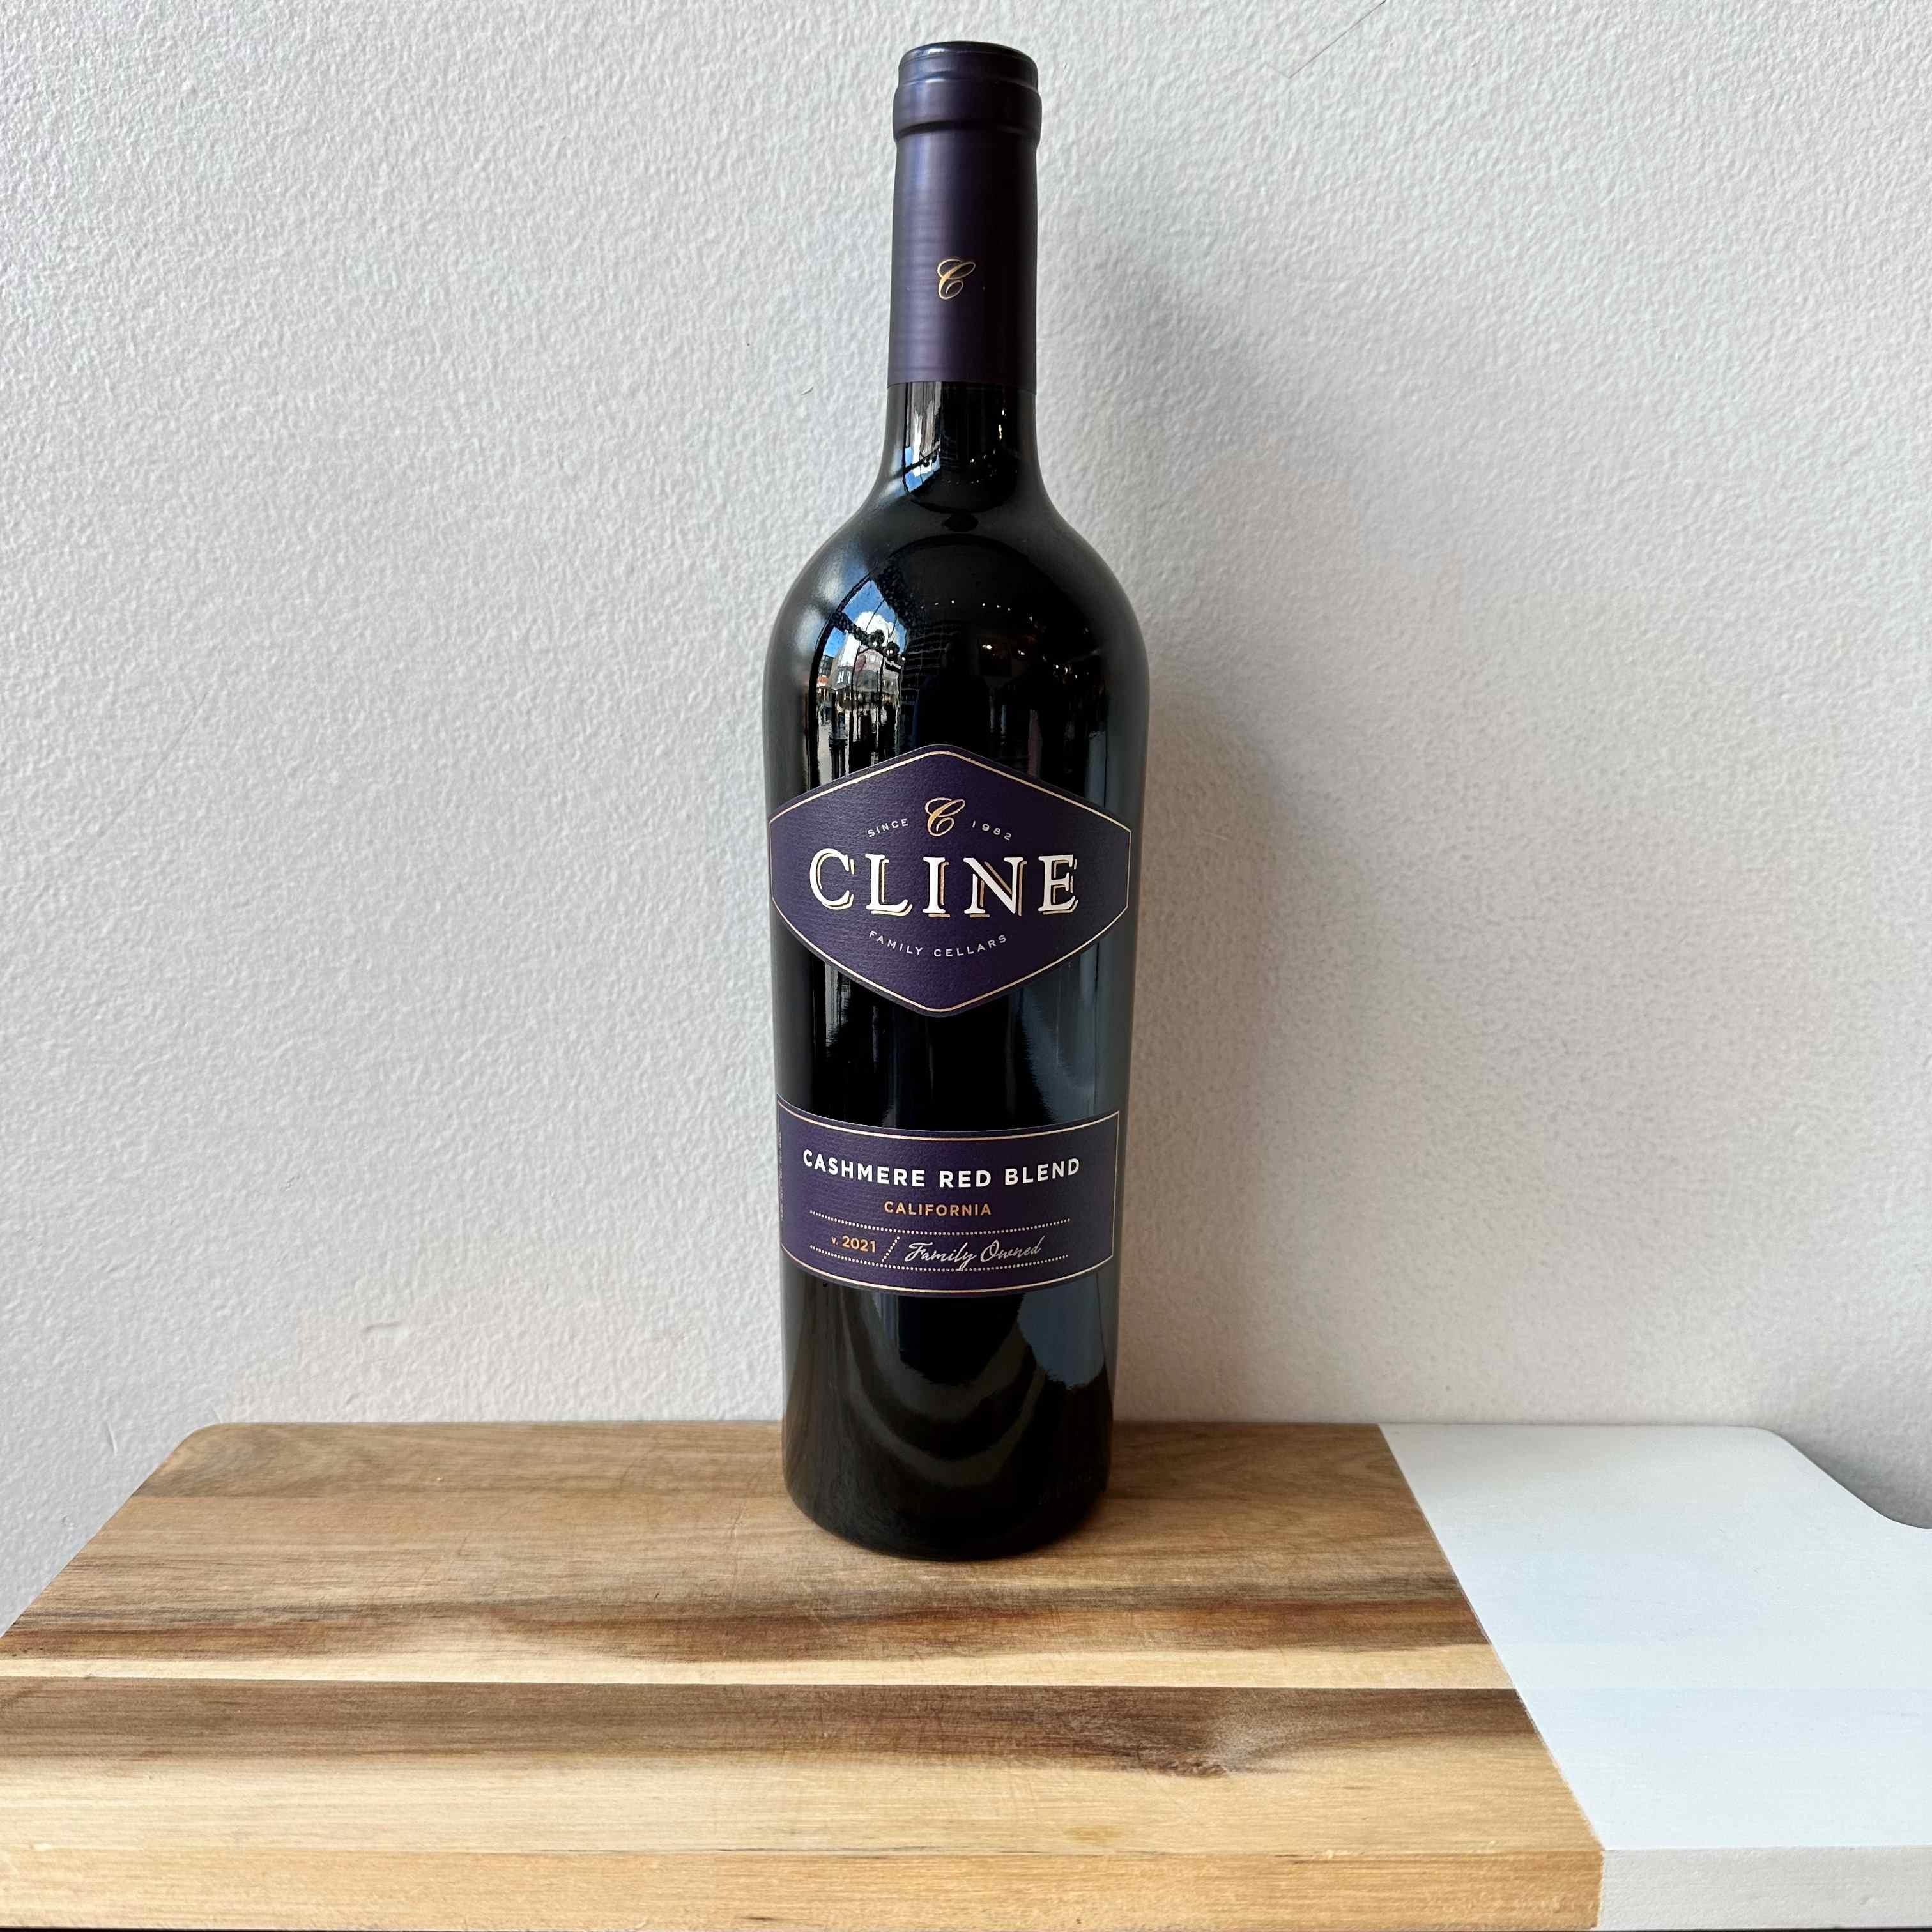 Cline Family Cellars "Cashmere" Red Blend 2021 California